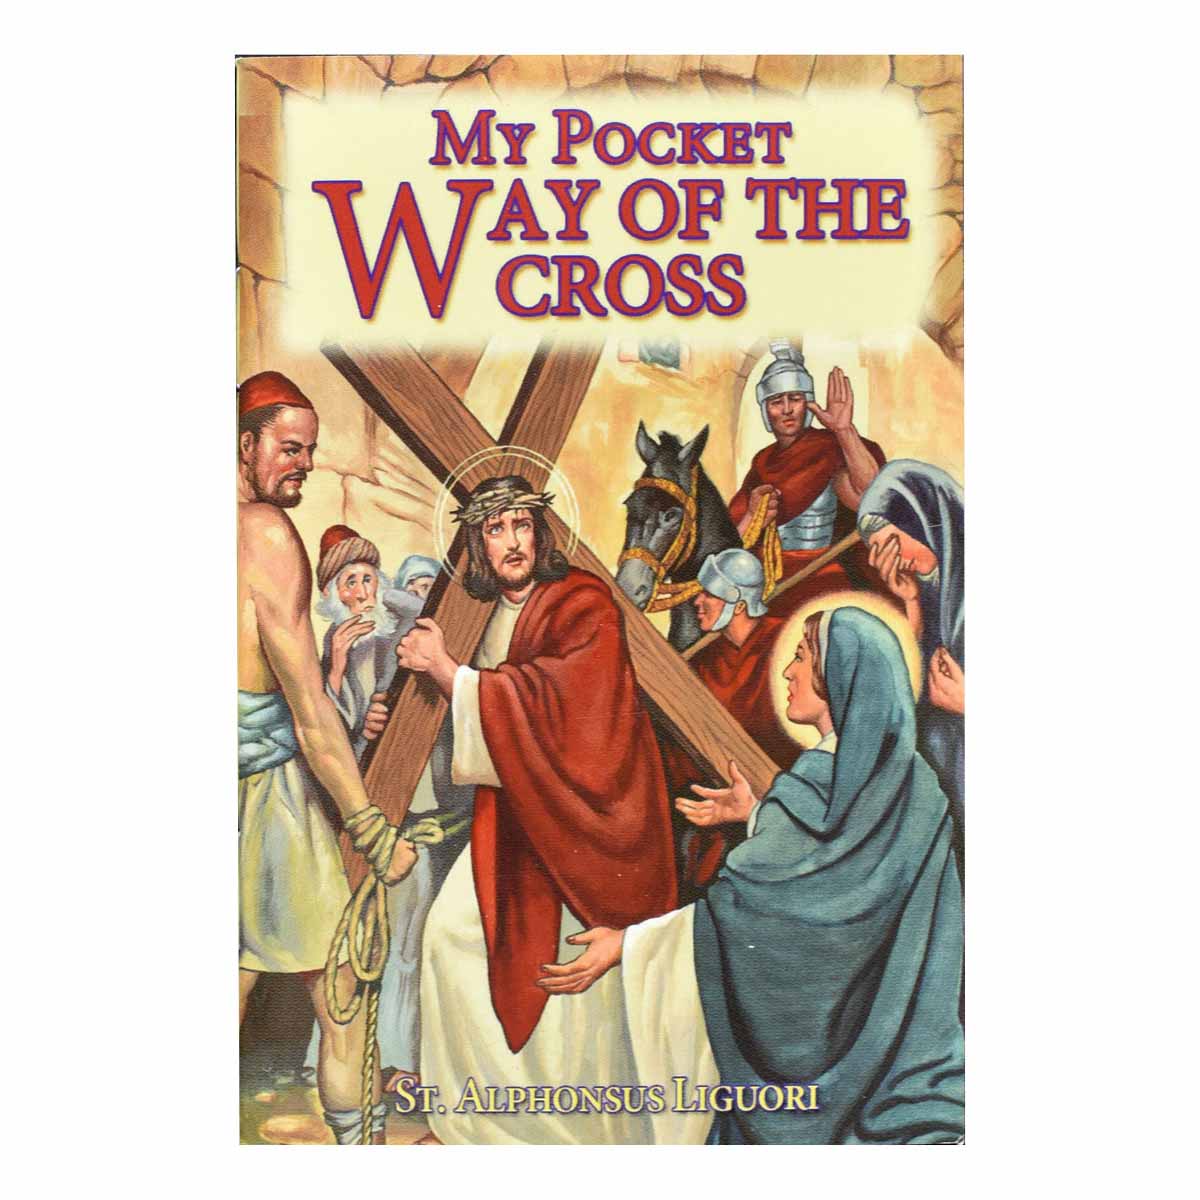 My Pocket Way Of The Cross By A. Liguori-18/04, Station Book